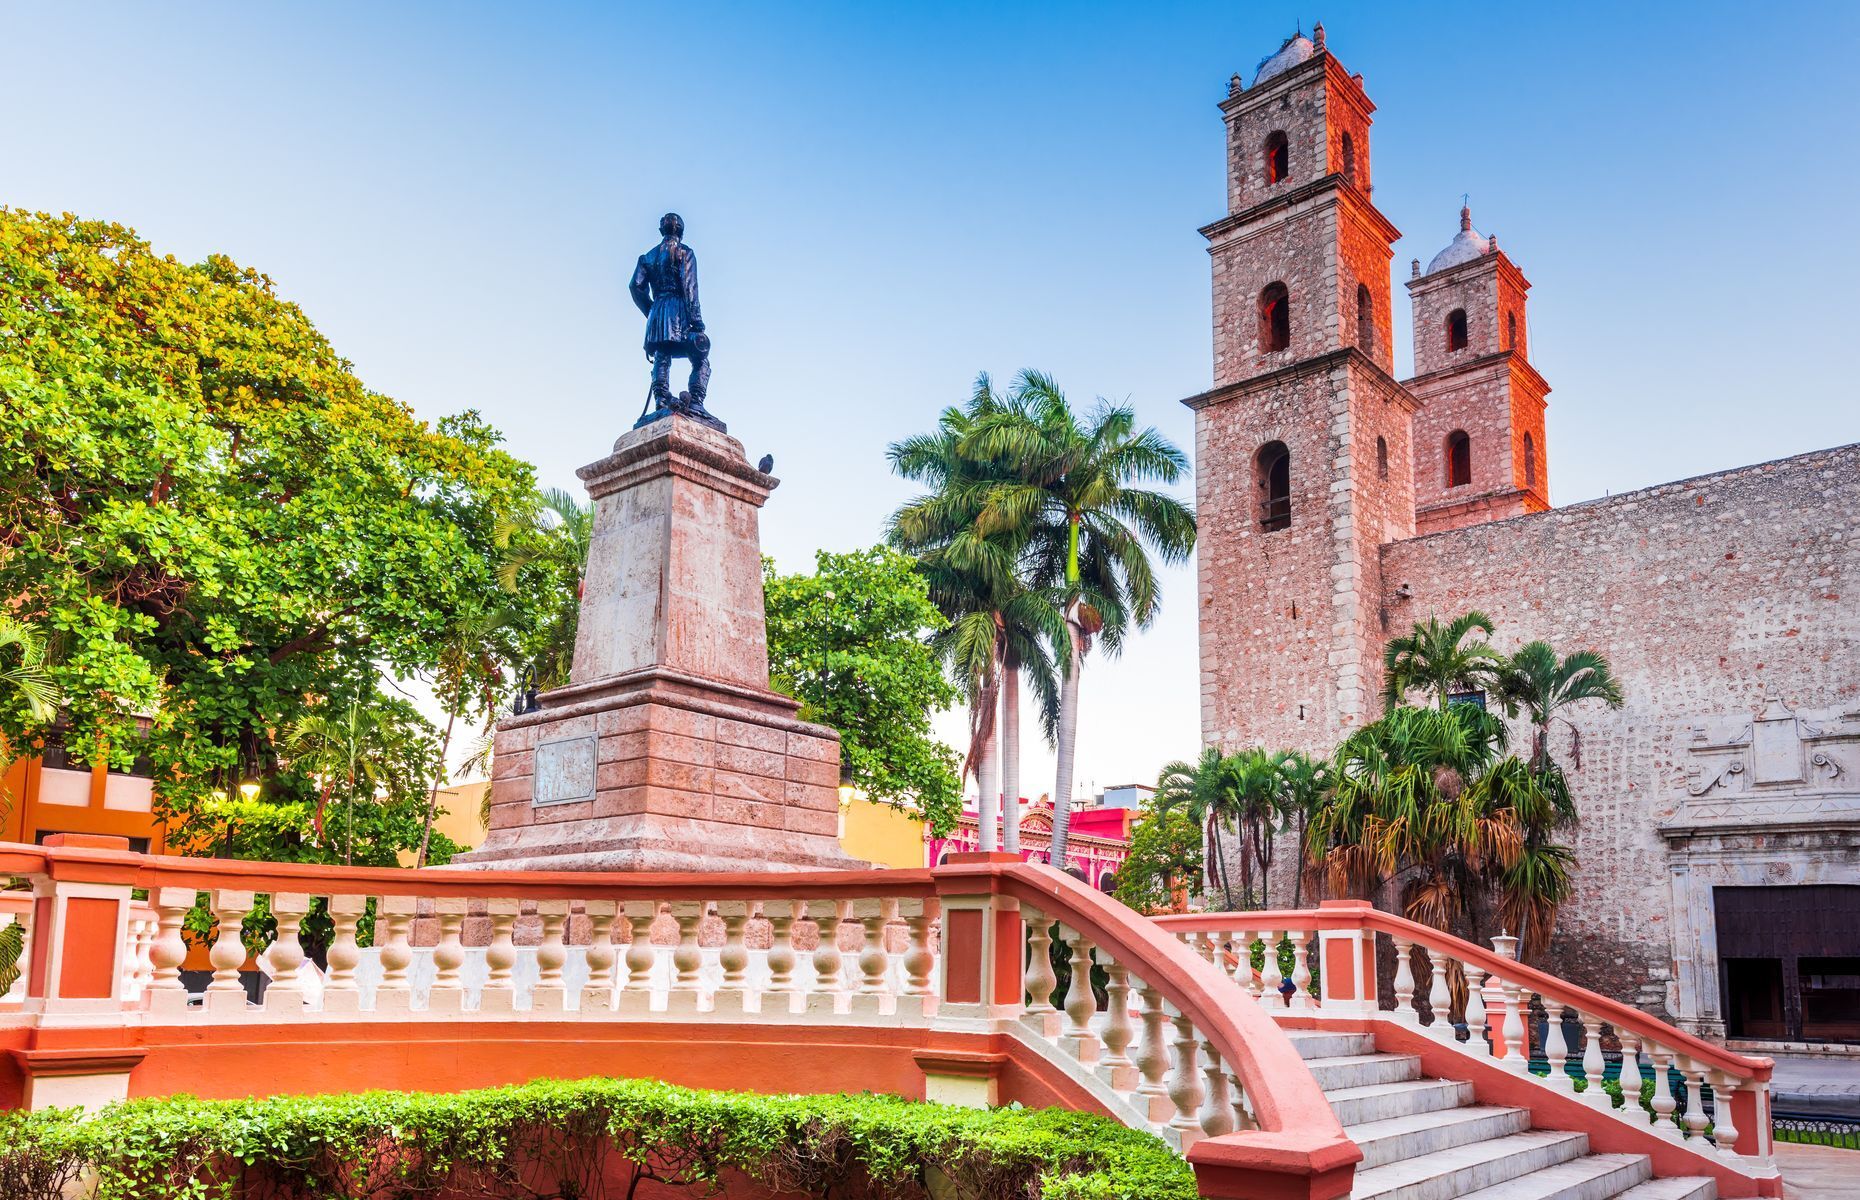 <p>The pretty colonial town of <a href="https://www.cnn.com/travel/article/things-to-do-merida-mexico/index.html" rel="noreferrer noopener">Mérida</a> was <a href="https://www.britannica.com/place/Merida-Mexico" rel="noreferrer noopener">founded in 1542</a>. The capital of the Yucatán boasts many colourful buildings and authentic gourmet restaurants. Explore a few of Mérida’s most beautiful spots with a stroll around Plaza Grande and a visit to its cathedral and Palacio Cantón.</p>